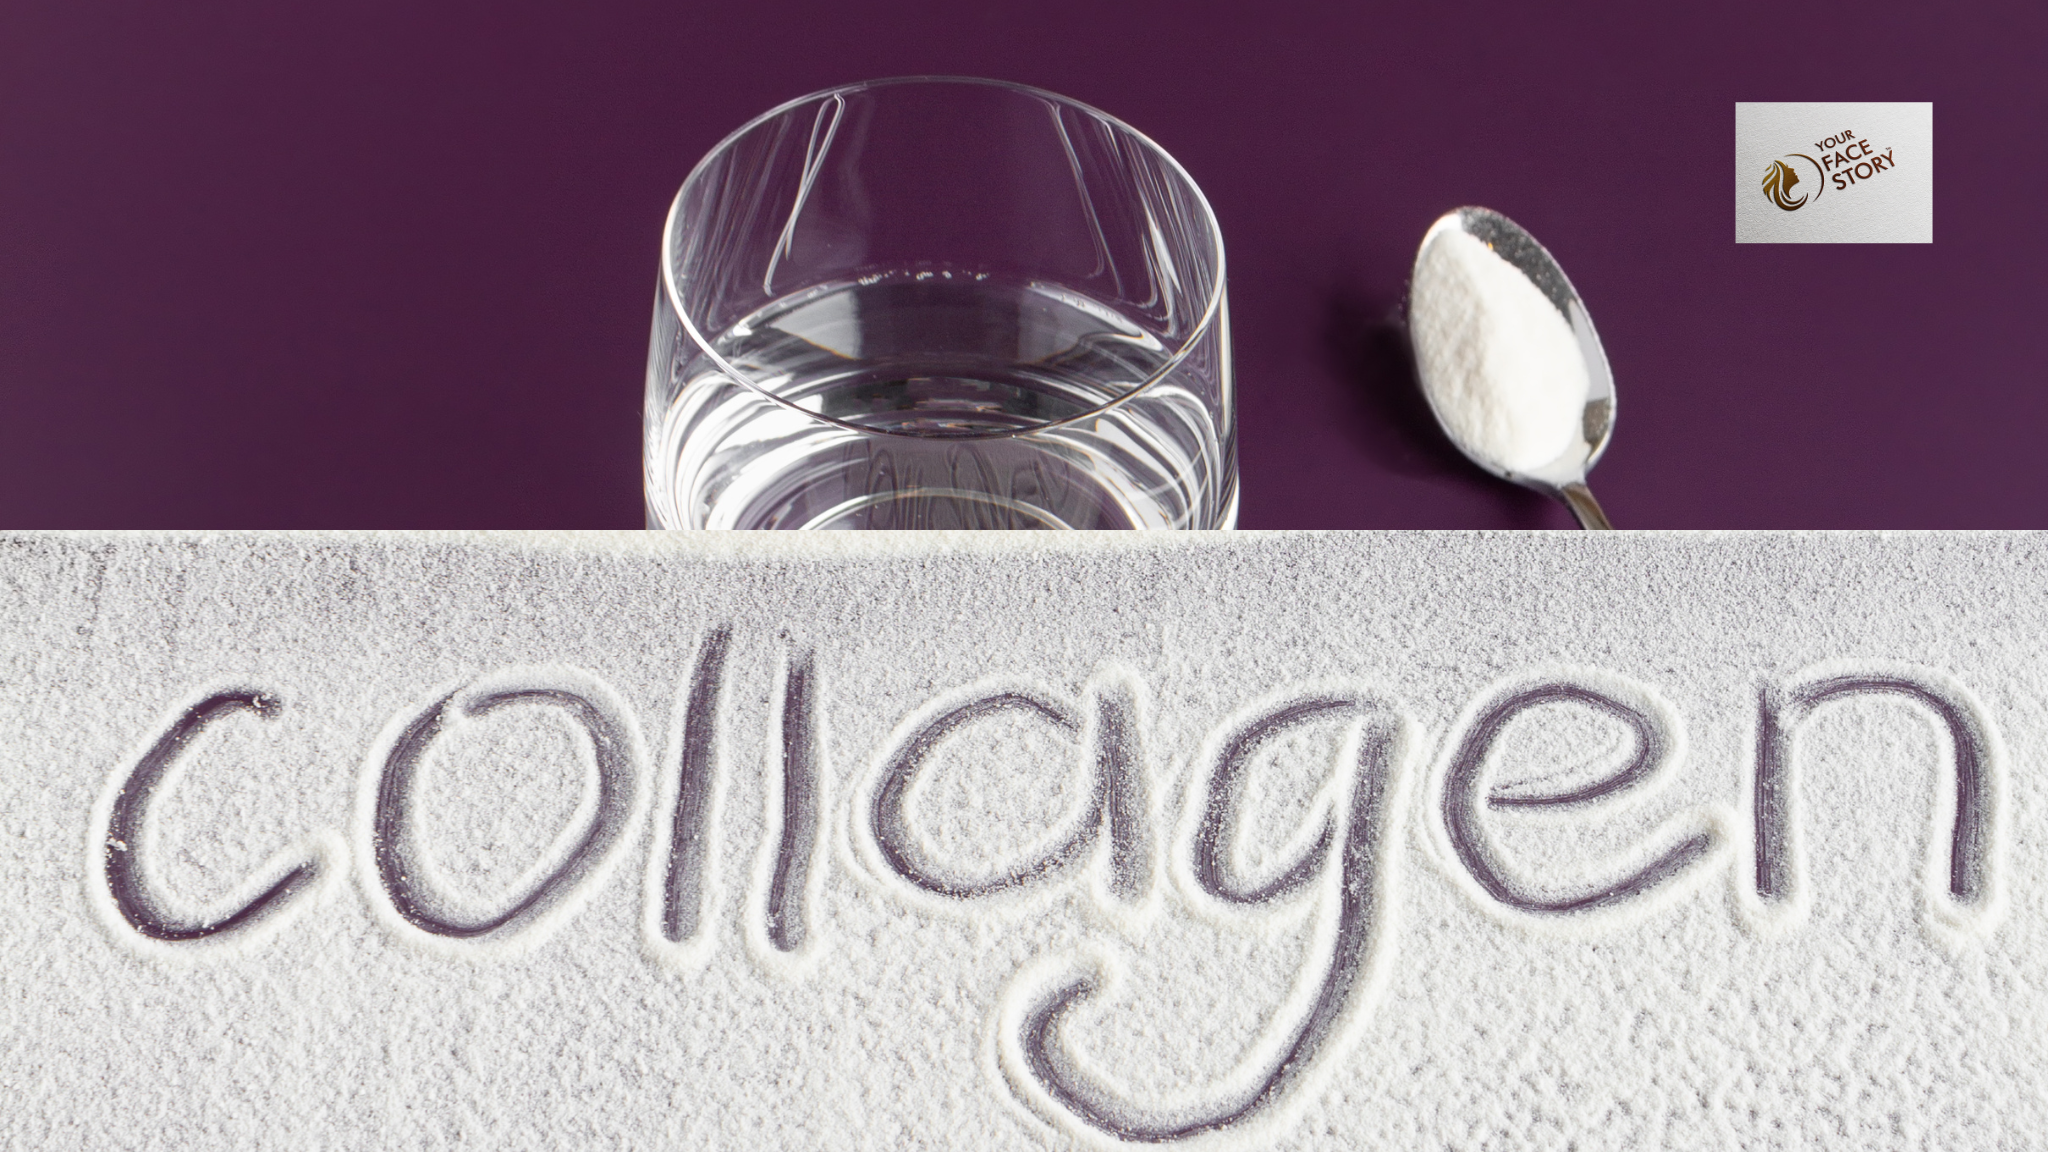 collagen 1080 px) (2048 × 1152 px).png